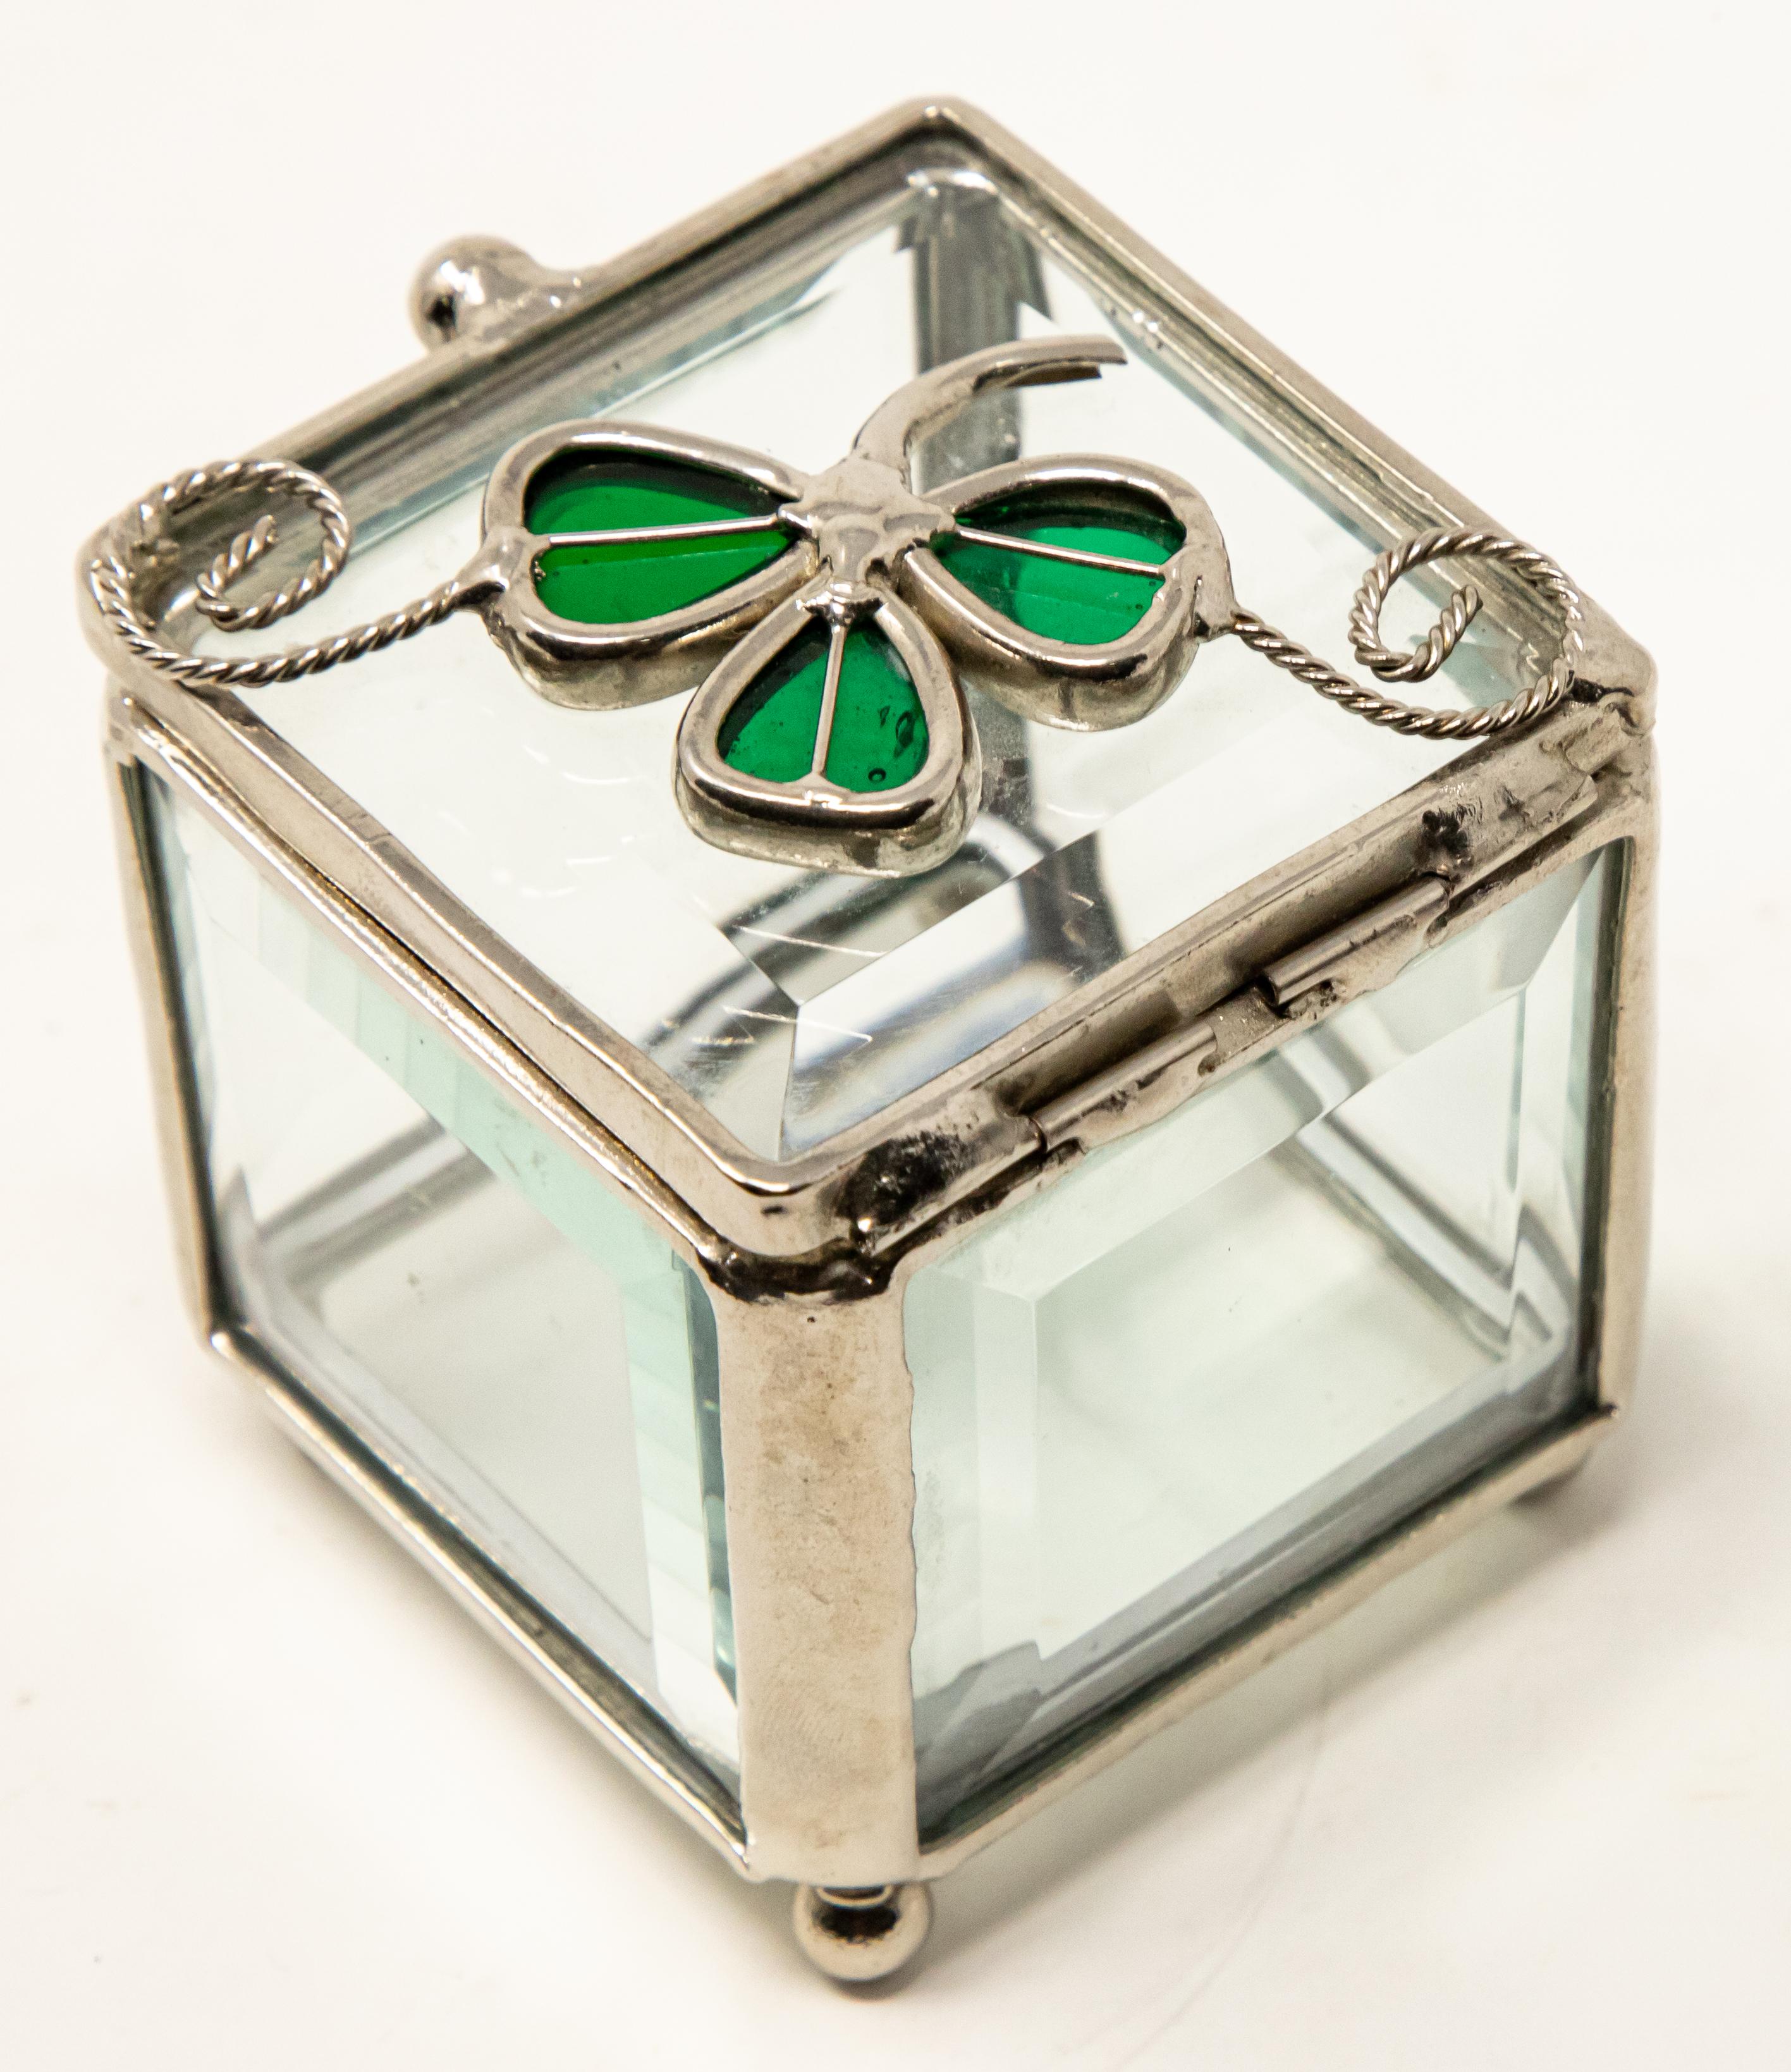 Metalwork Sterling Silver and Beveled Glass Trinket Box with Clover For Sale